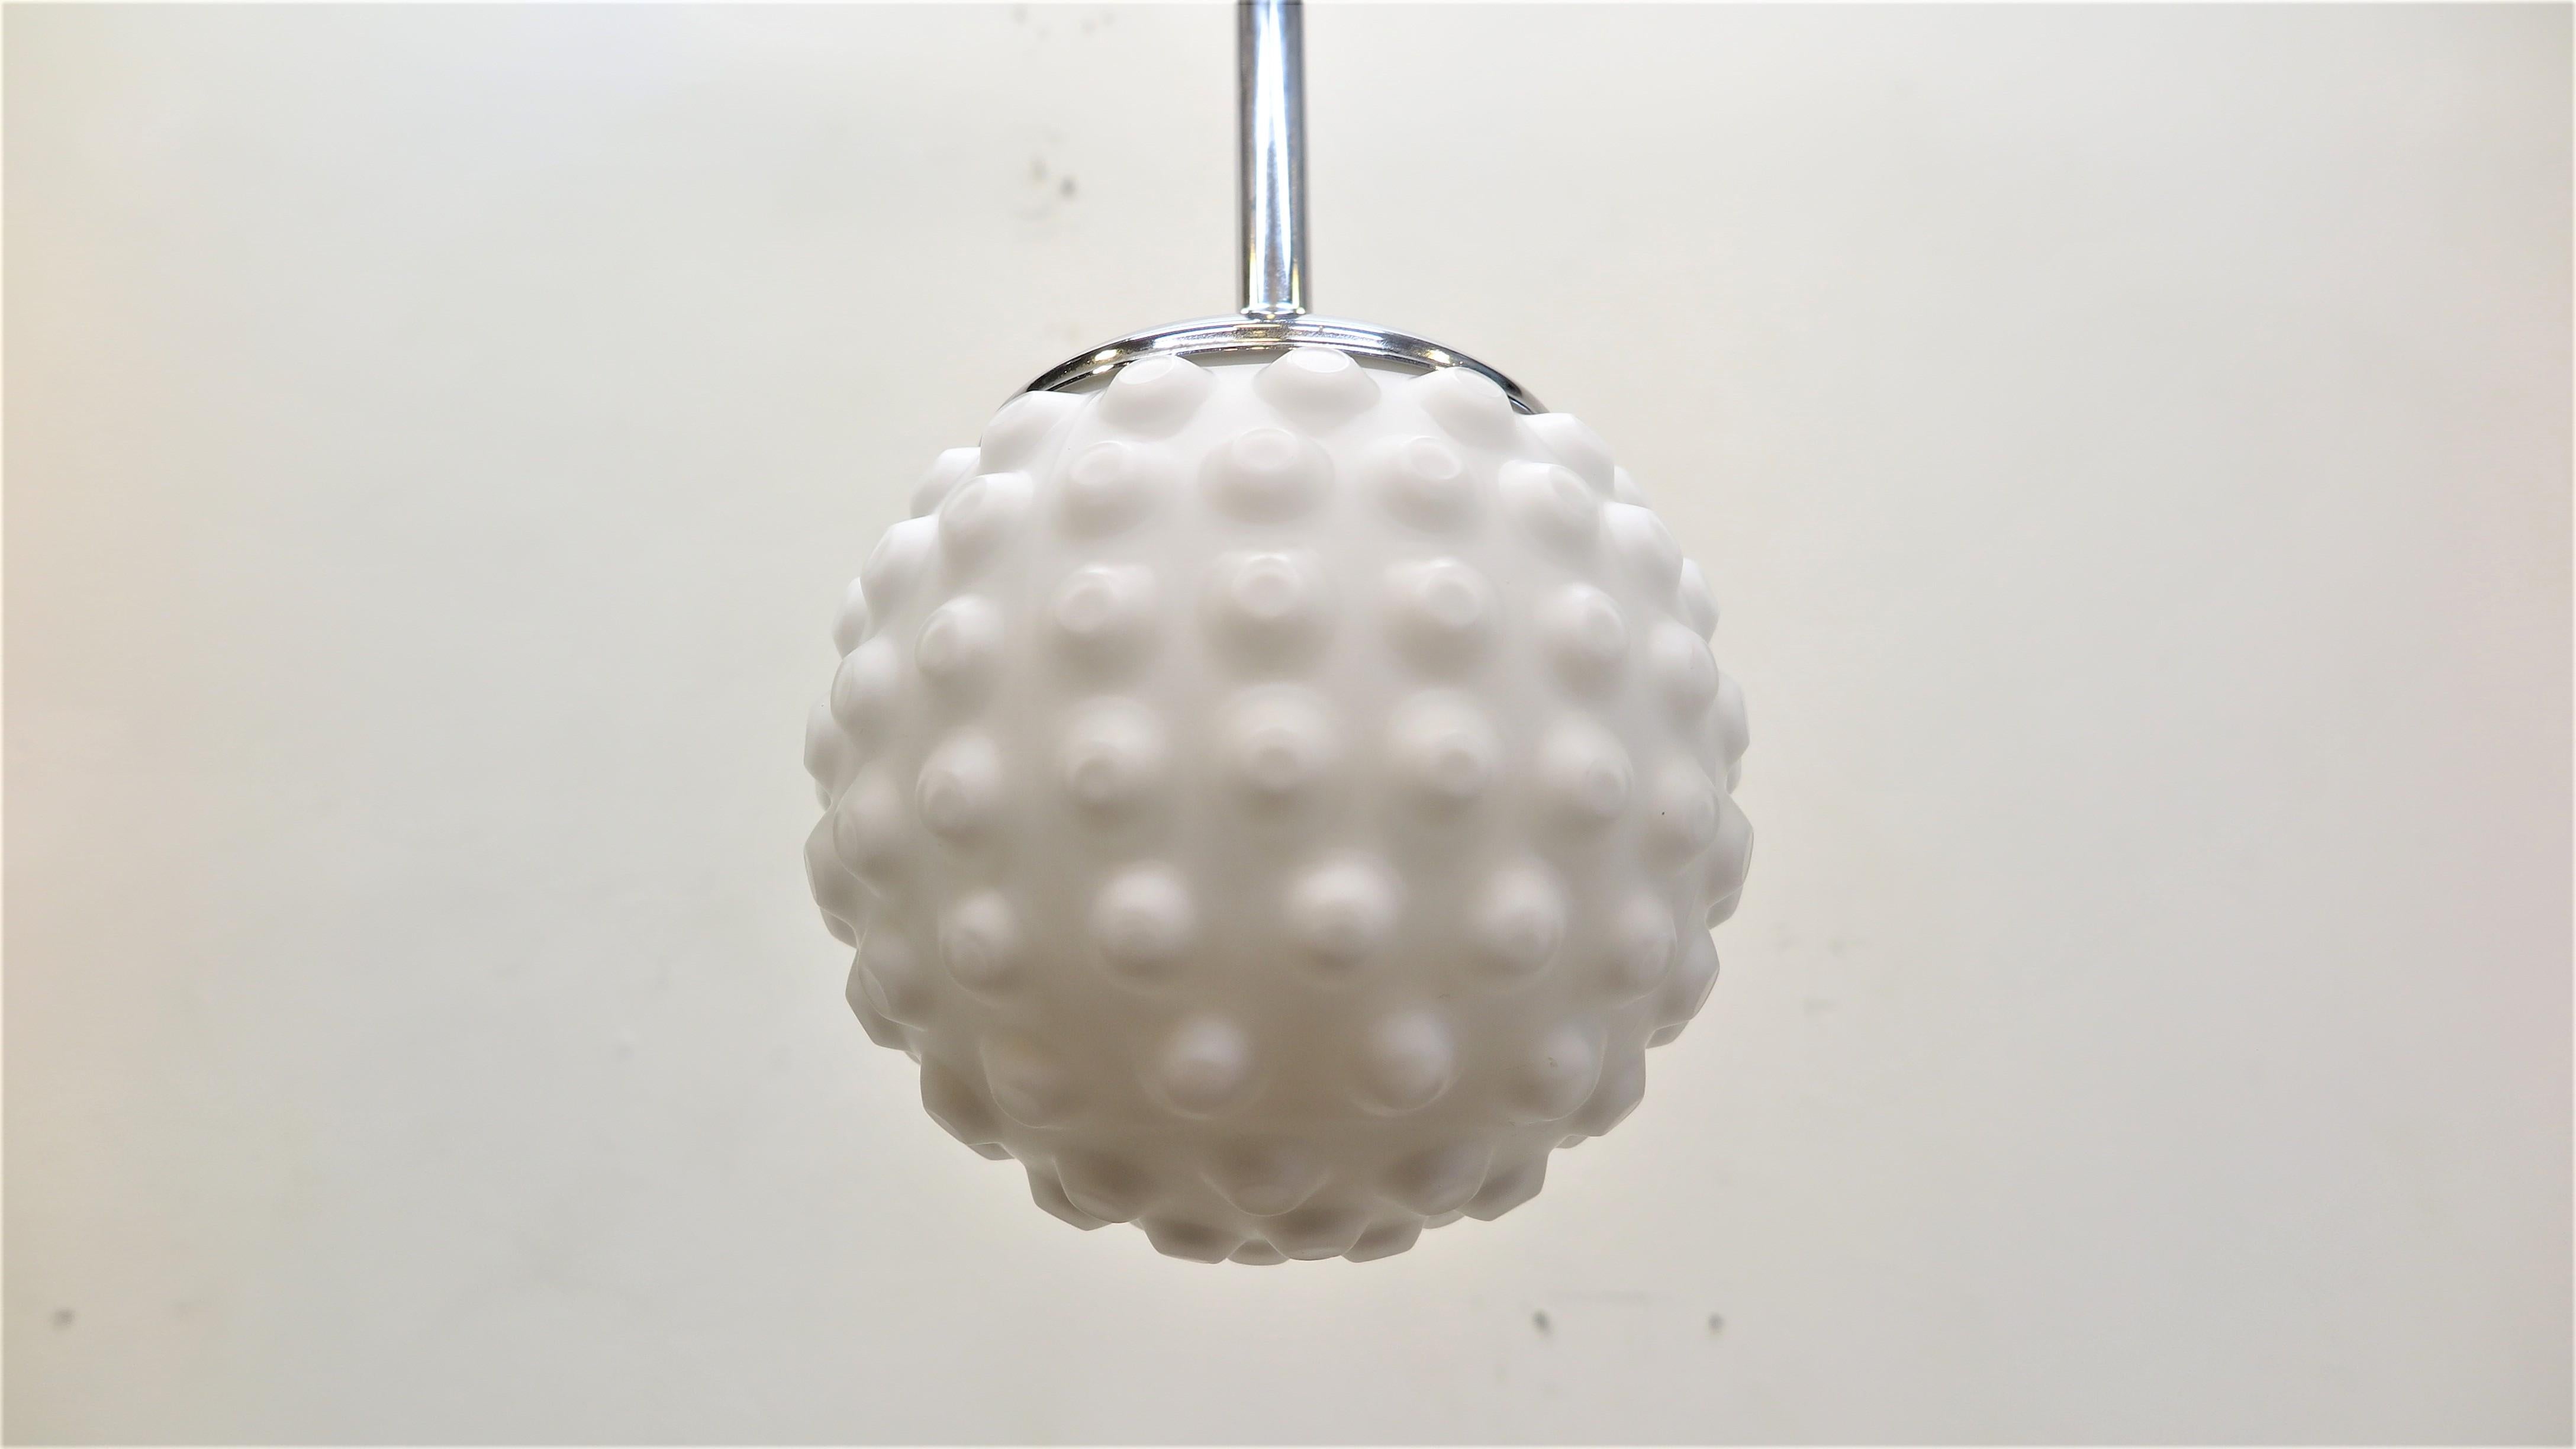 Bubble Sphere Frosted White glass pendant.  Milk Glass ball pendant light on chrome shaft made in Germany, Doria Leuchten, 1970s. Textured Bubble type molded white frosted glass Sphere pendant light having adjustable height. The current wire allows